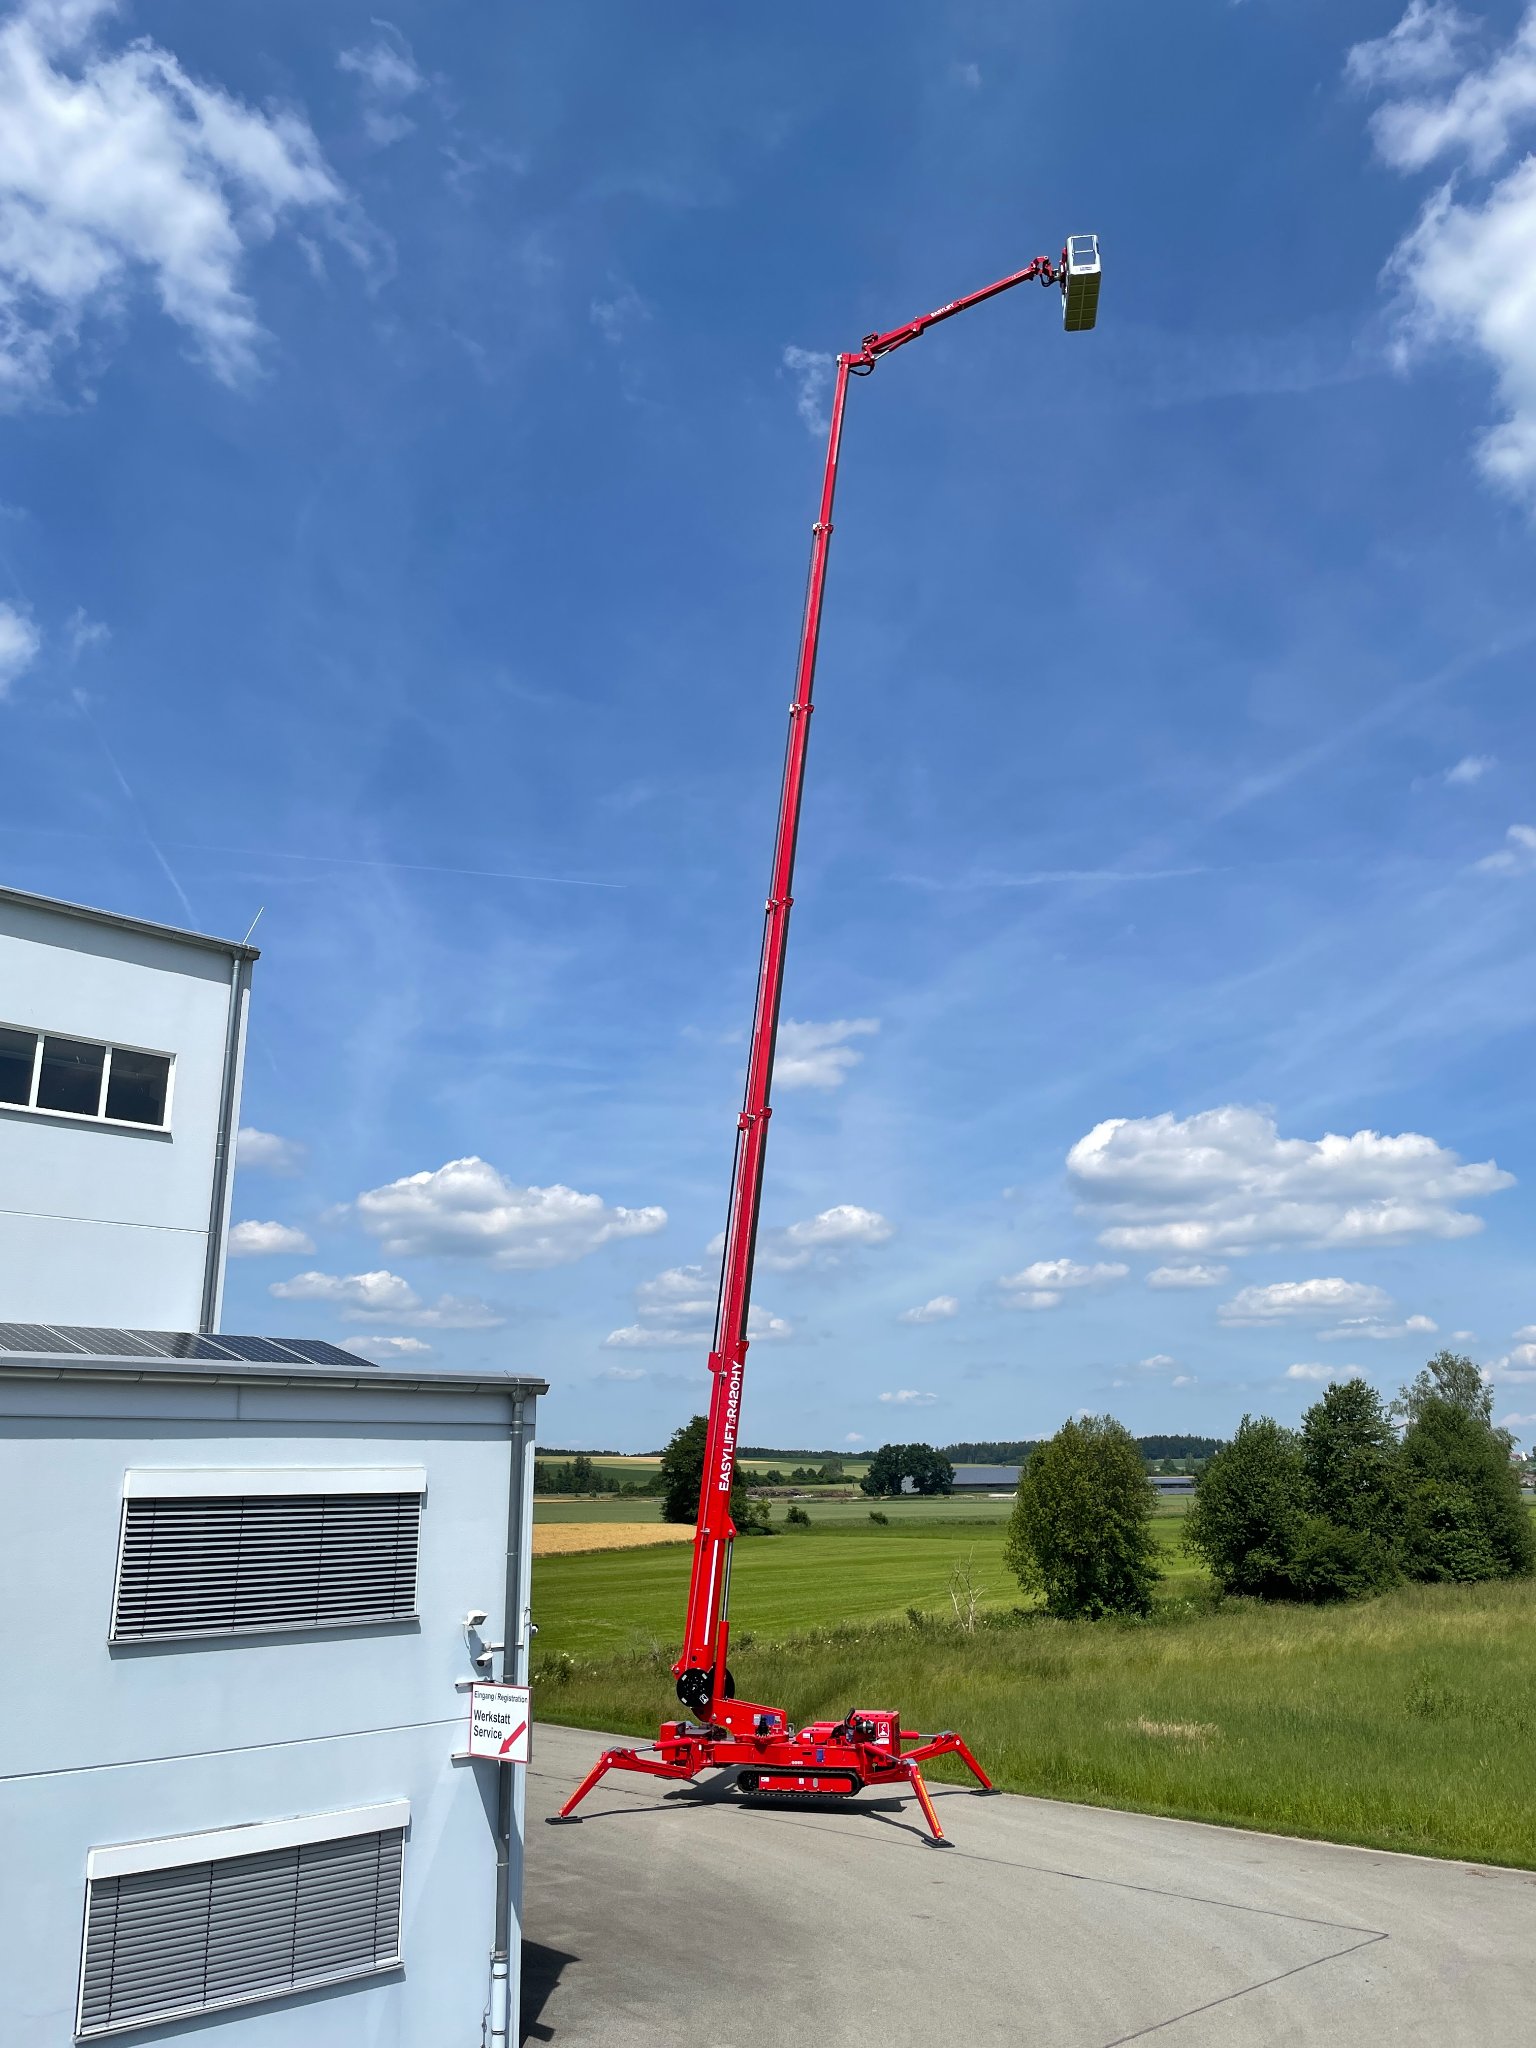 R420HY: demo at PartnerLift and technical course for Lift Manager